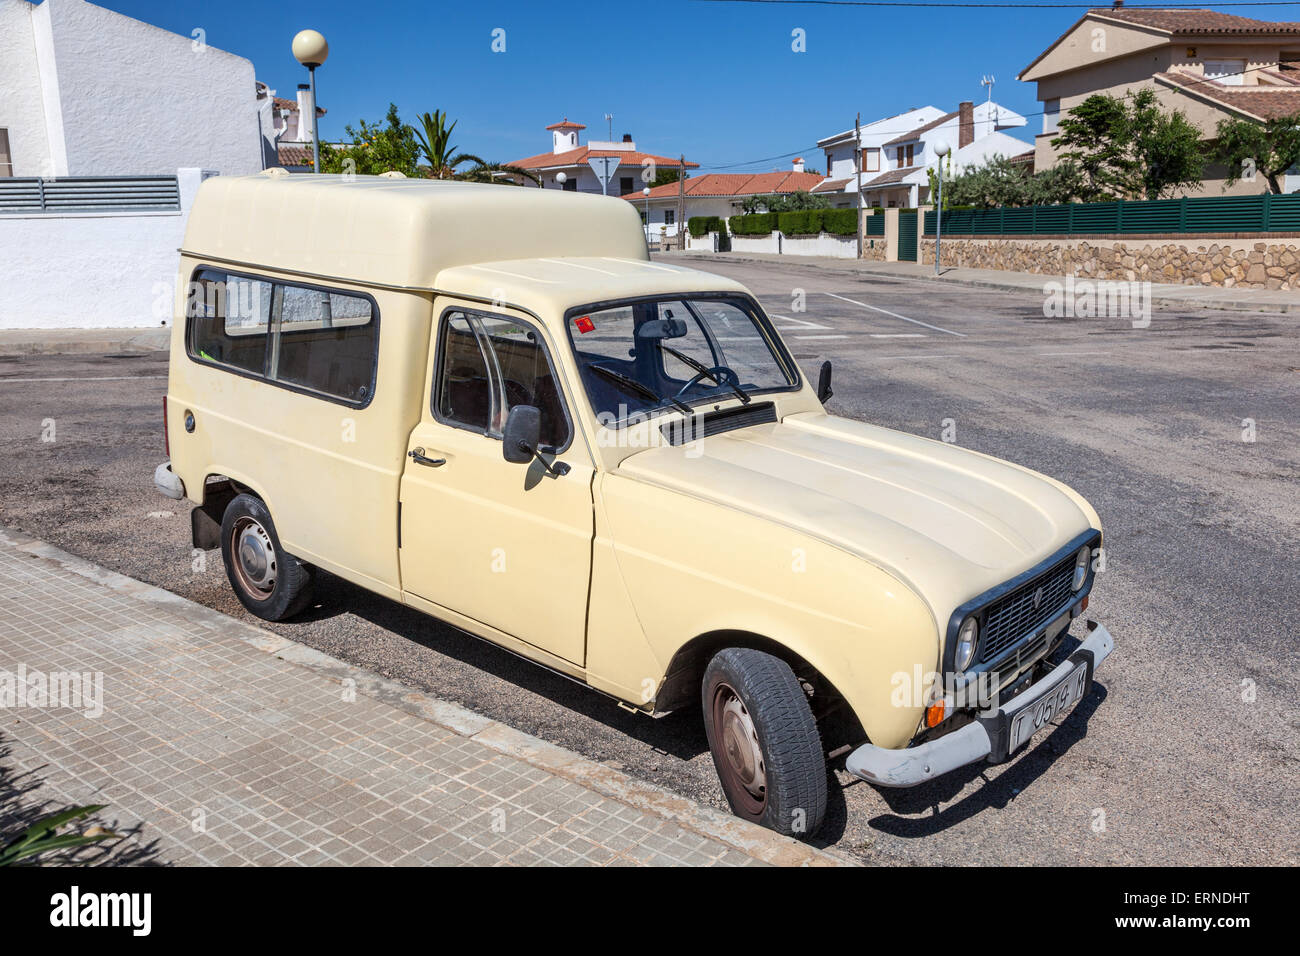 Old Renault 4 Fourgonnette (van) parked in the street in Miami Platja. May 6, 2015 in Miami Platja, Stock Photo